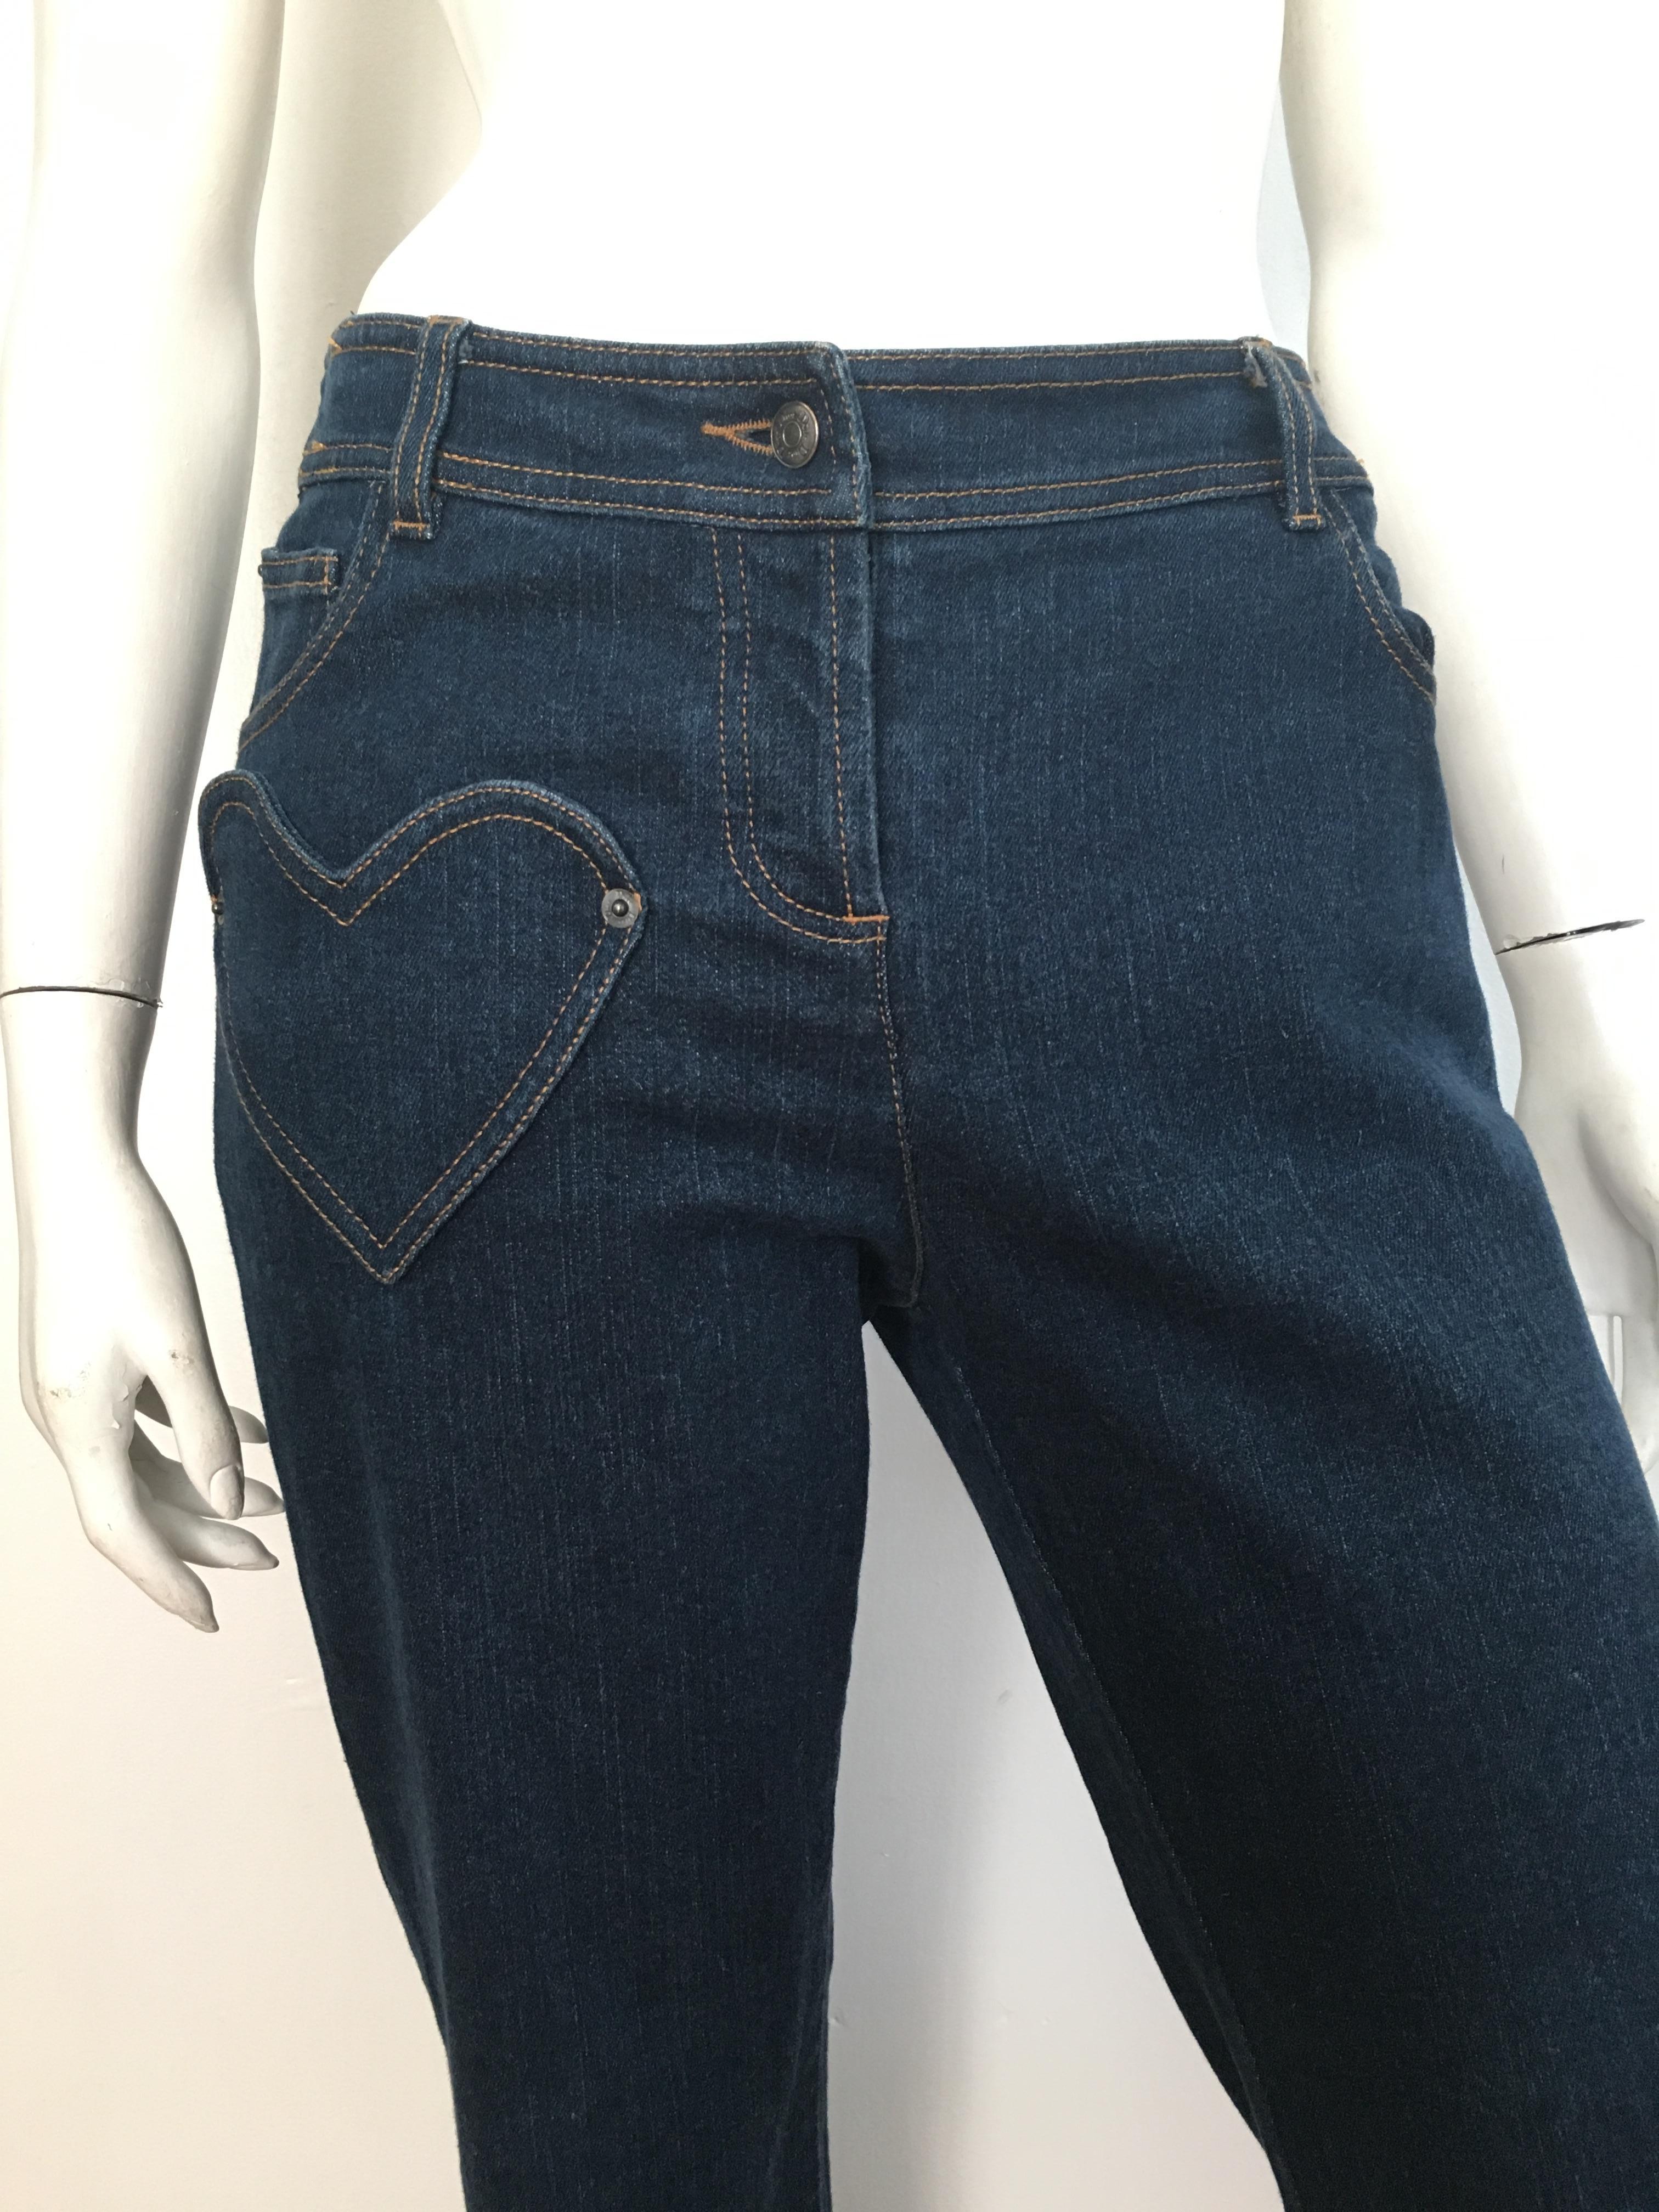 jeans with heart pockets